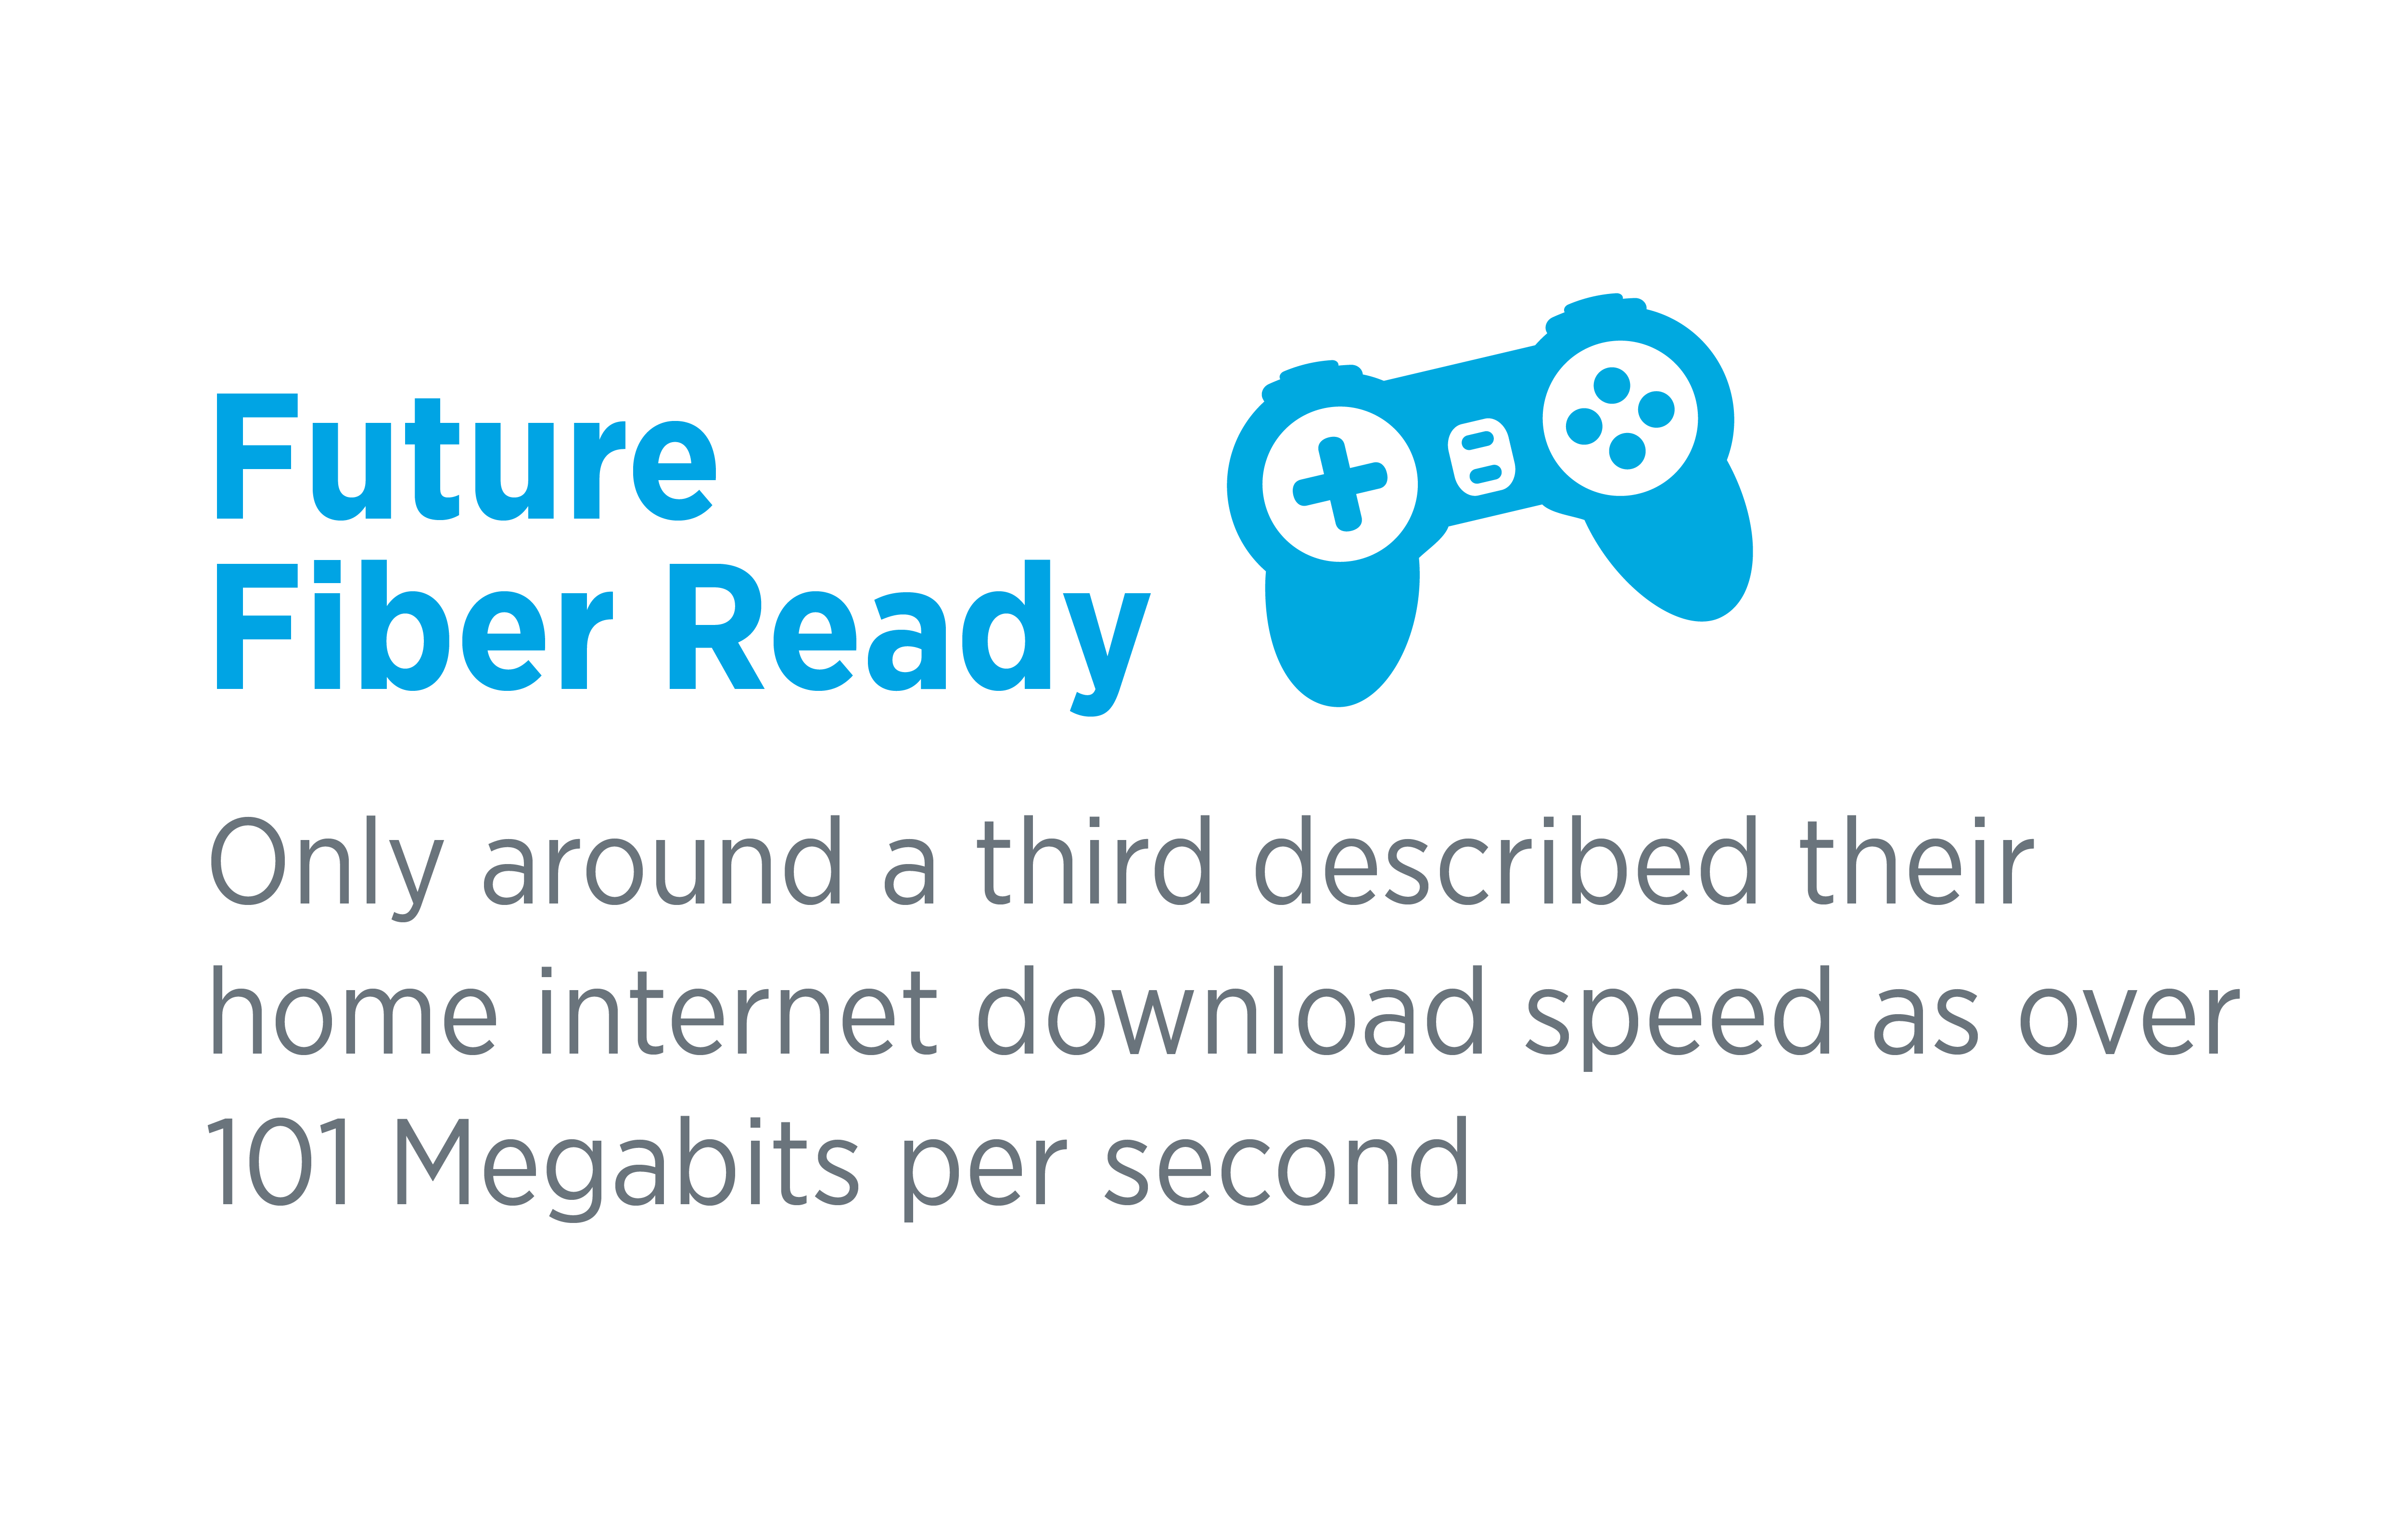 only around a third described their home internet download speeds as over 101 Megabits per second